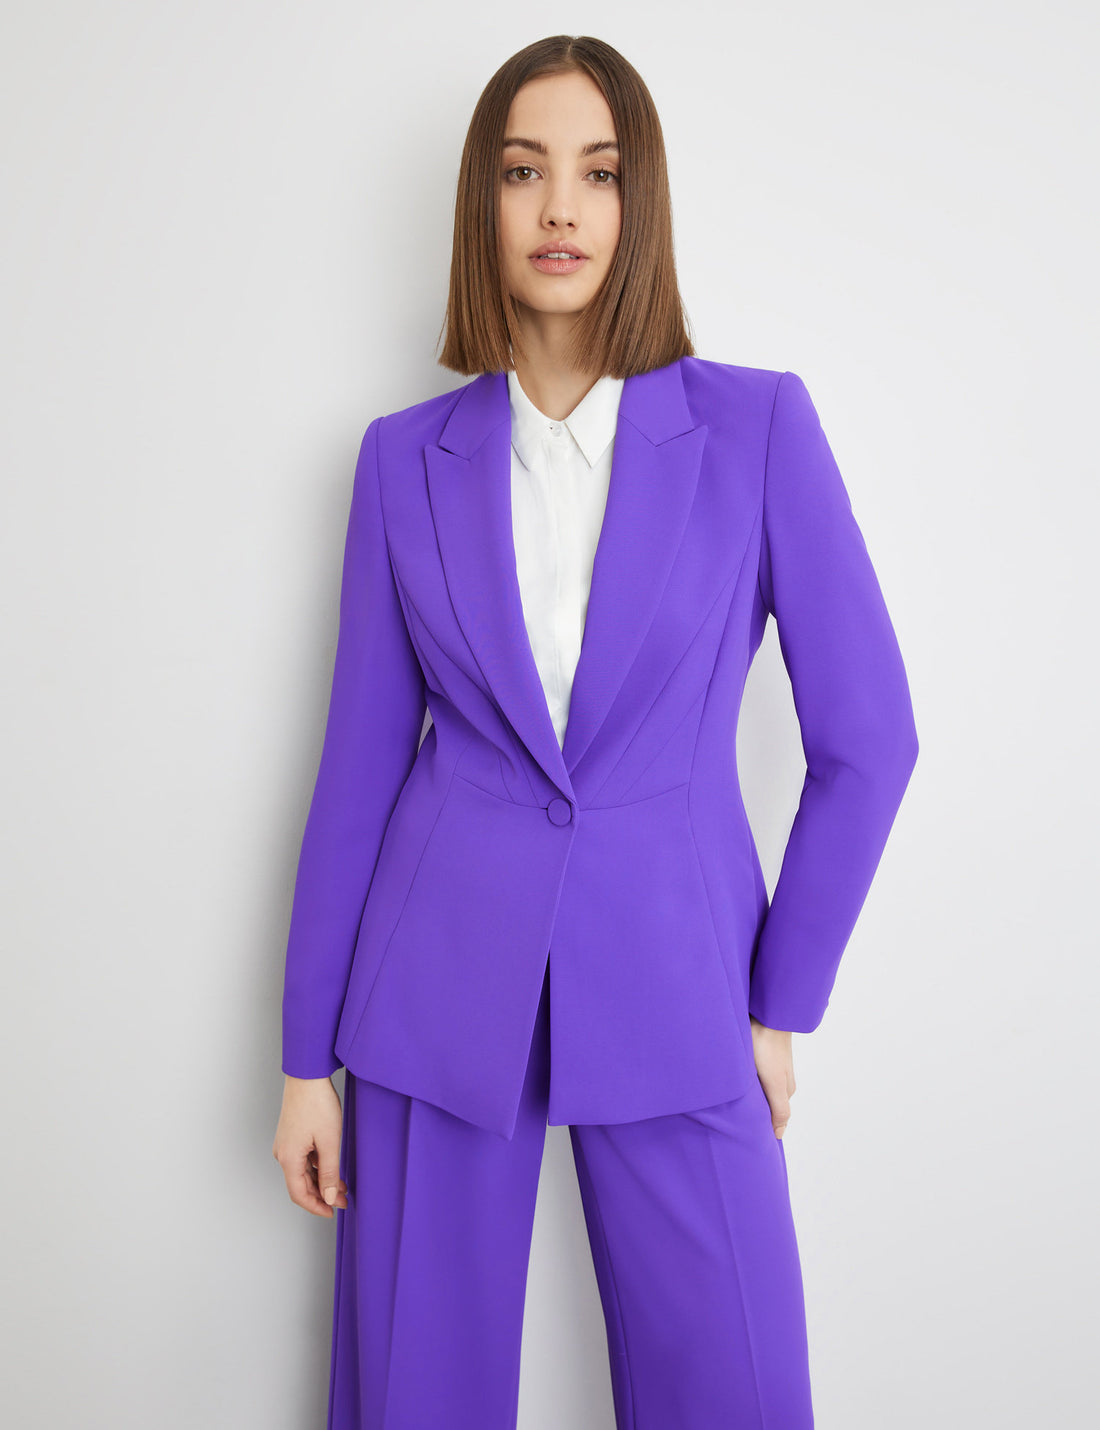 Fitted Blazer Made Of Fine Fabric_530302-11054_8810_01